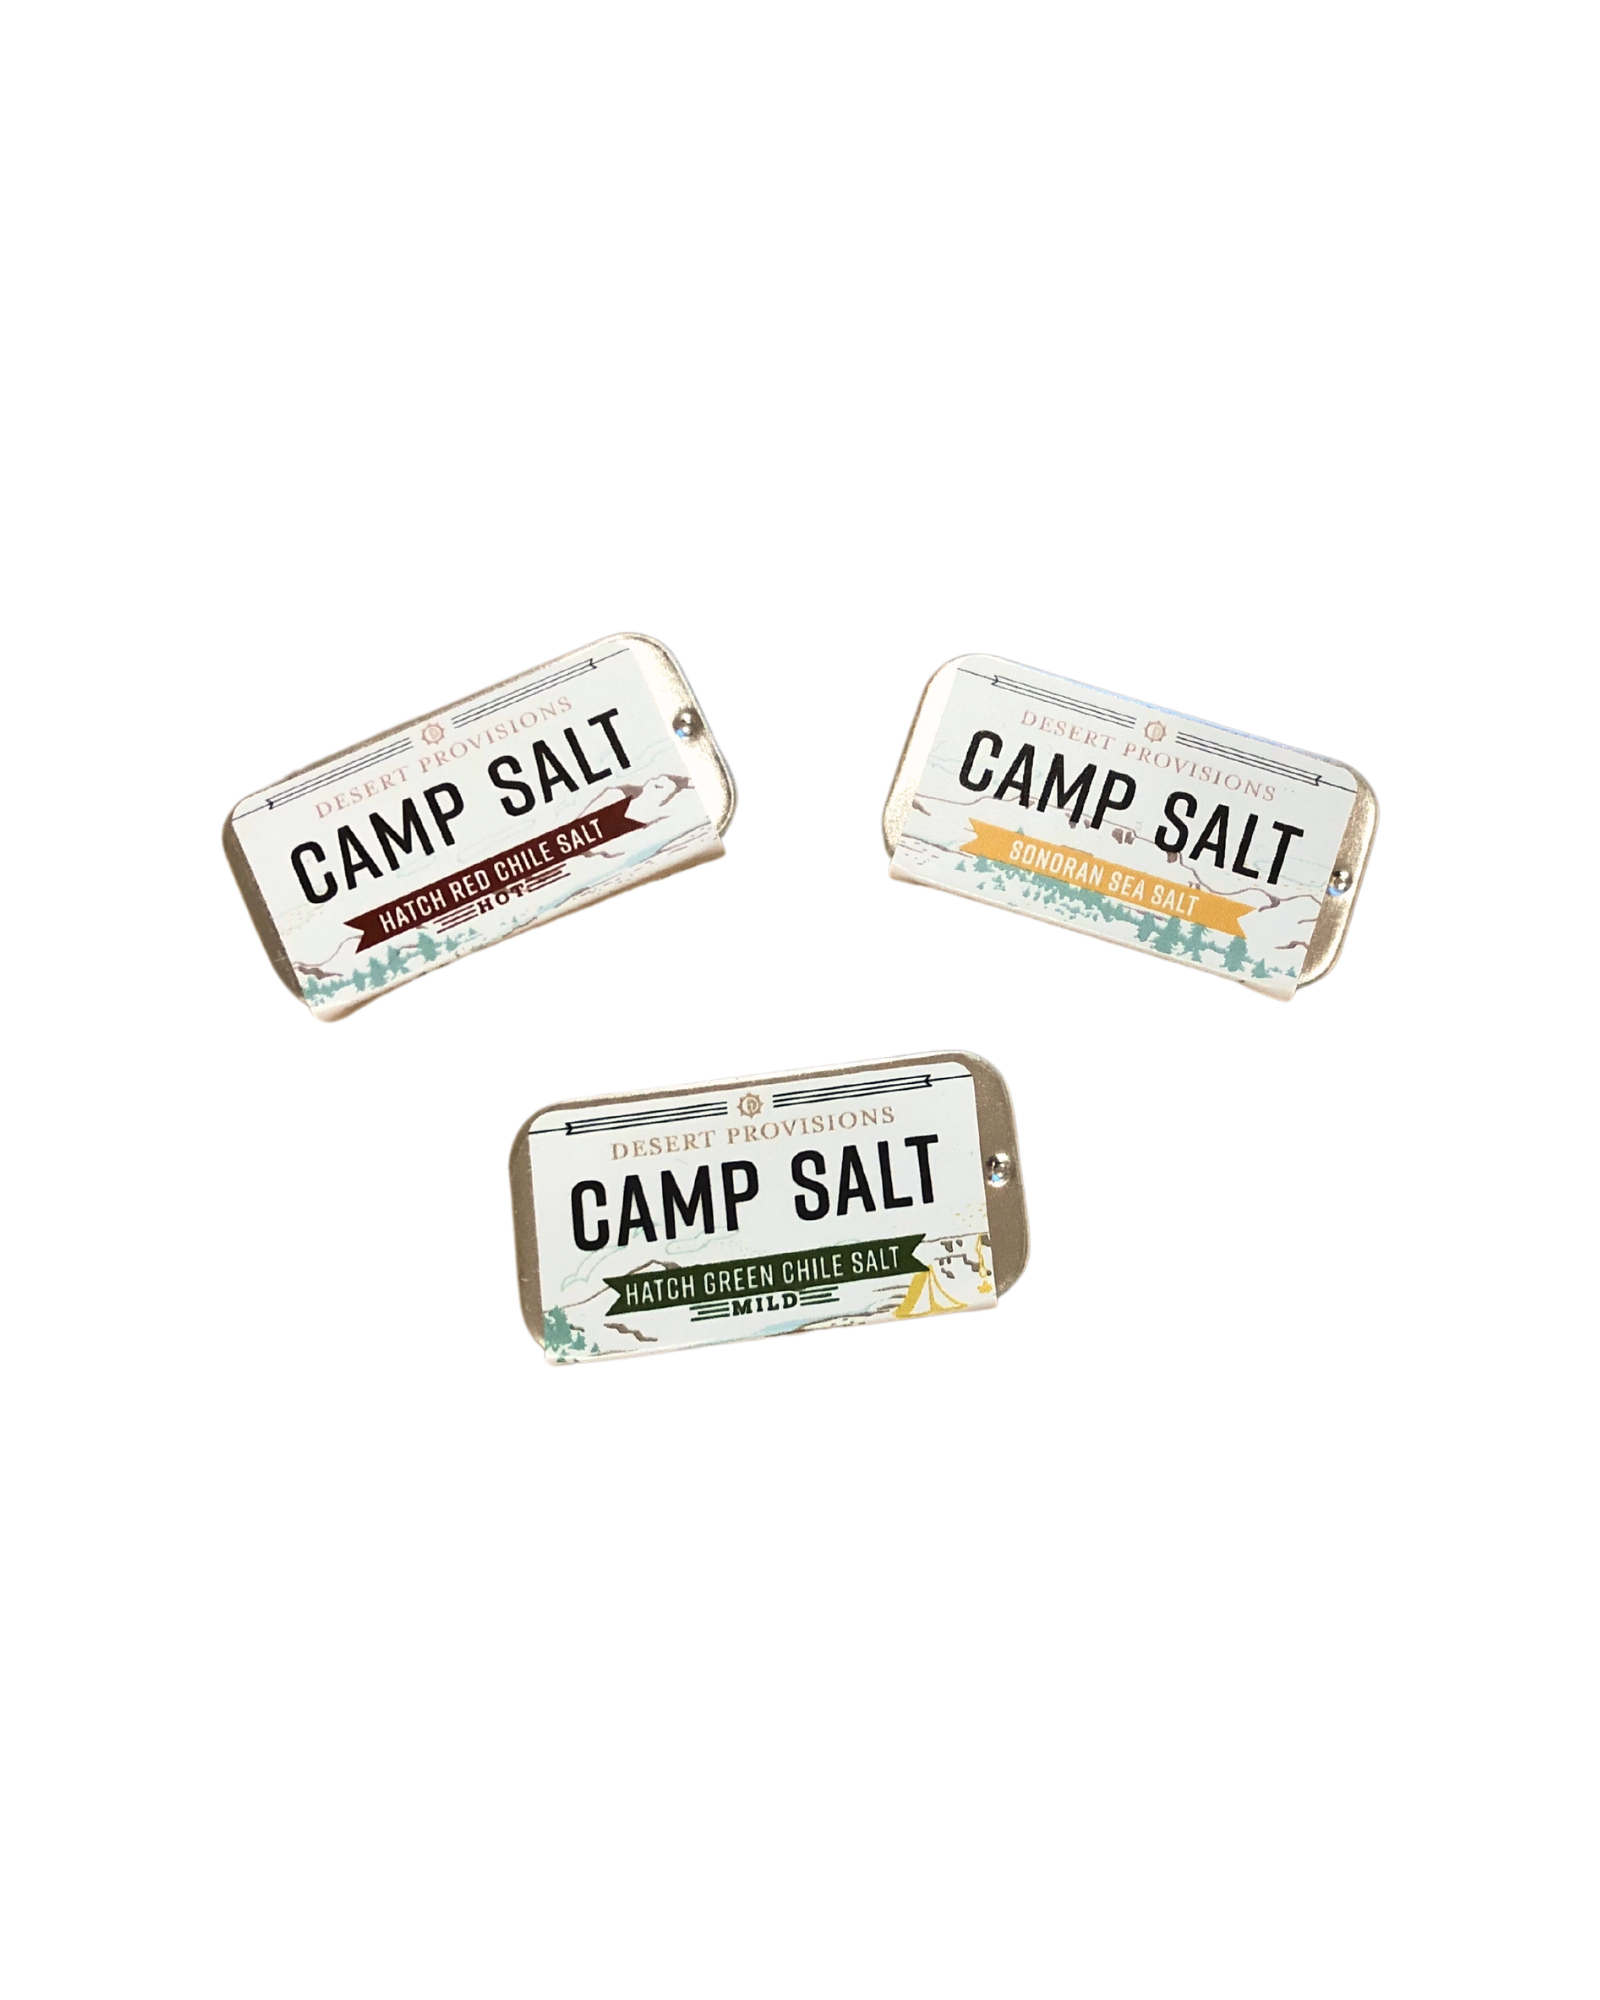 Camp salt trio - hatch red chile, sonoran sea salt, and hatch green chile small boxes